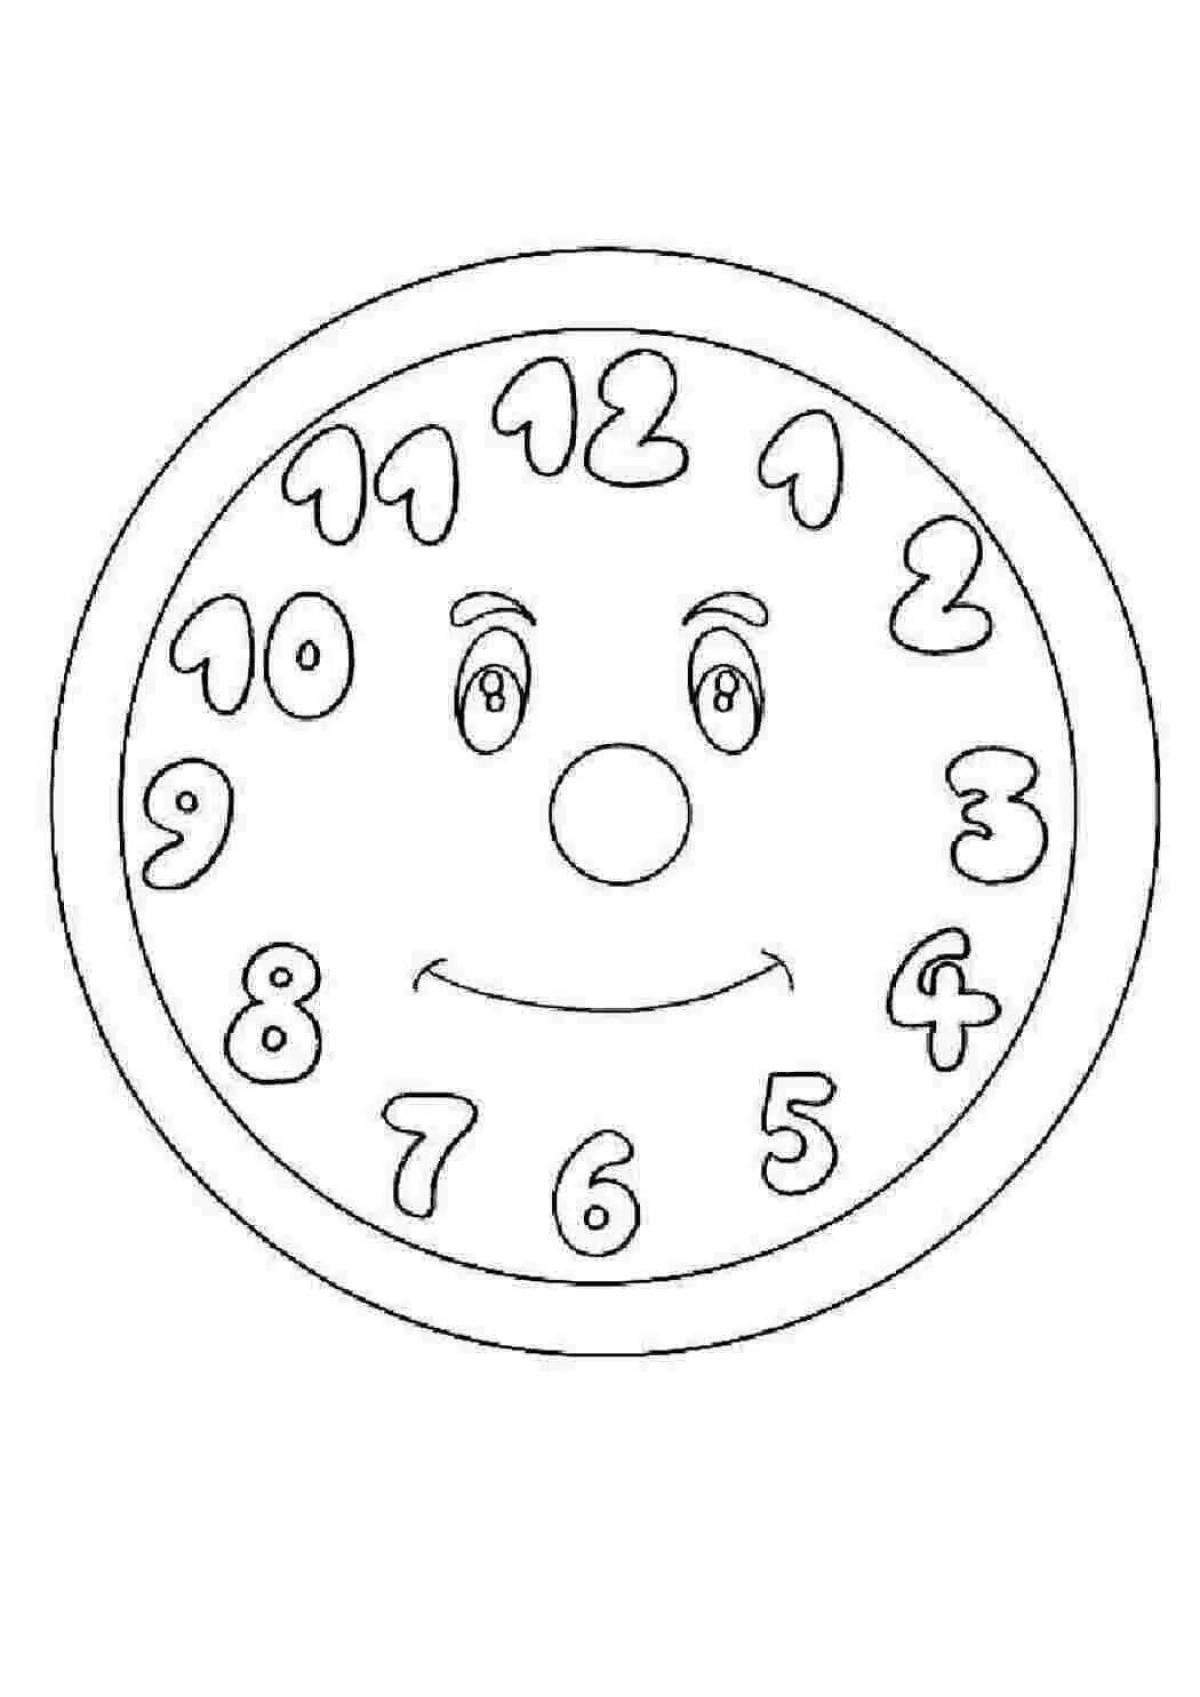 Brilliant dial with hands